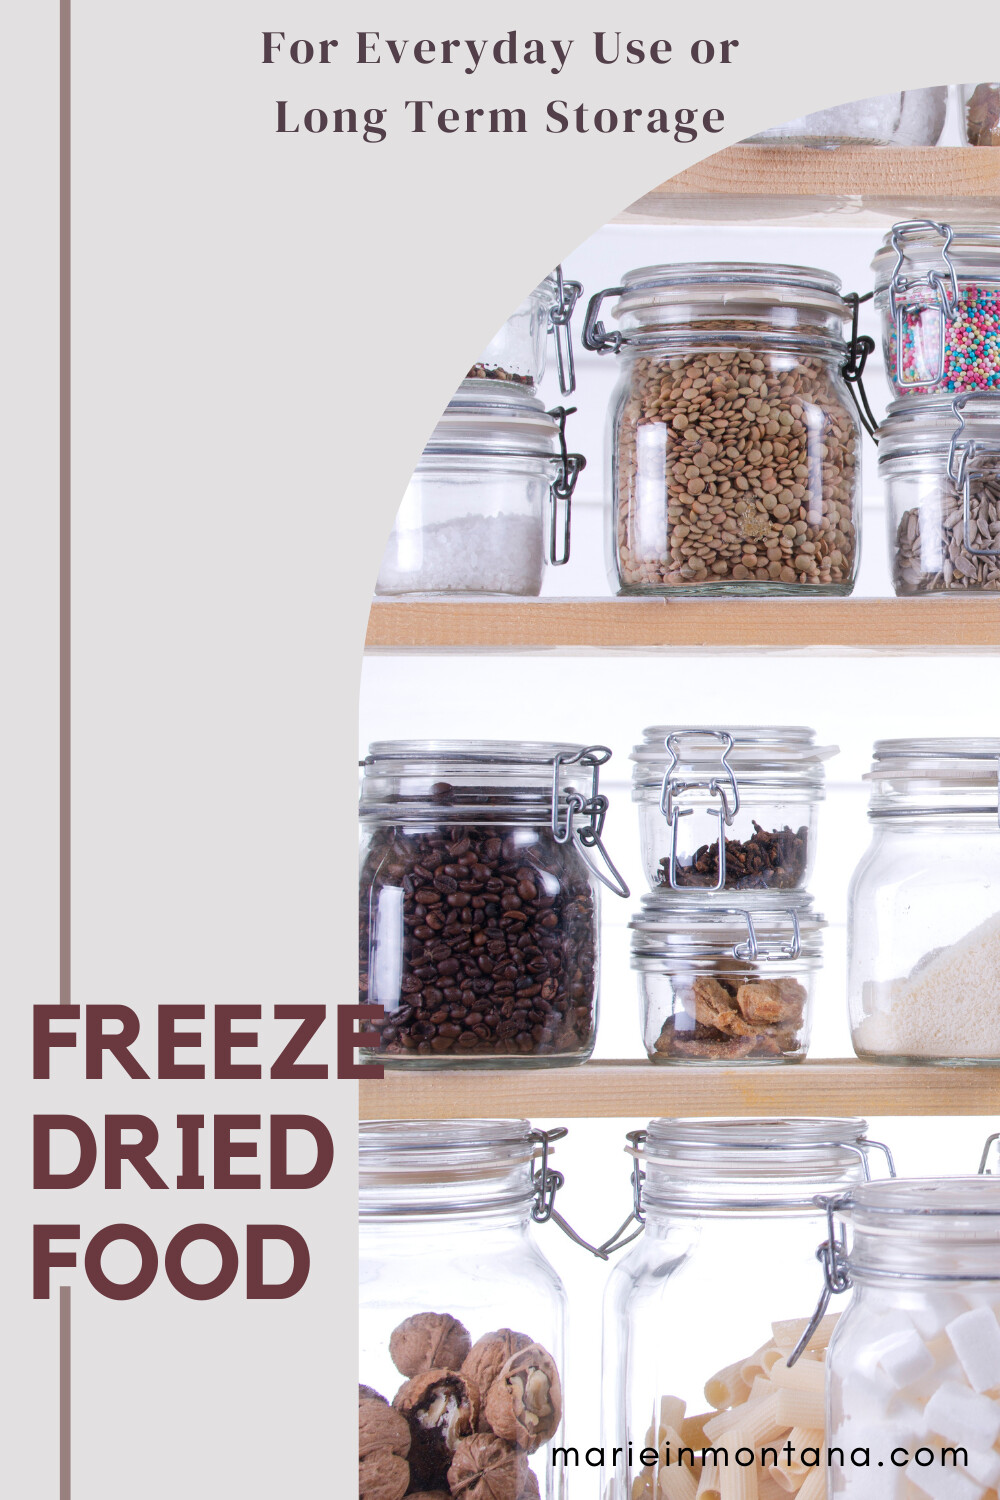 Freeze Dried Food For Every Day Use and Storage